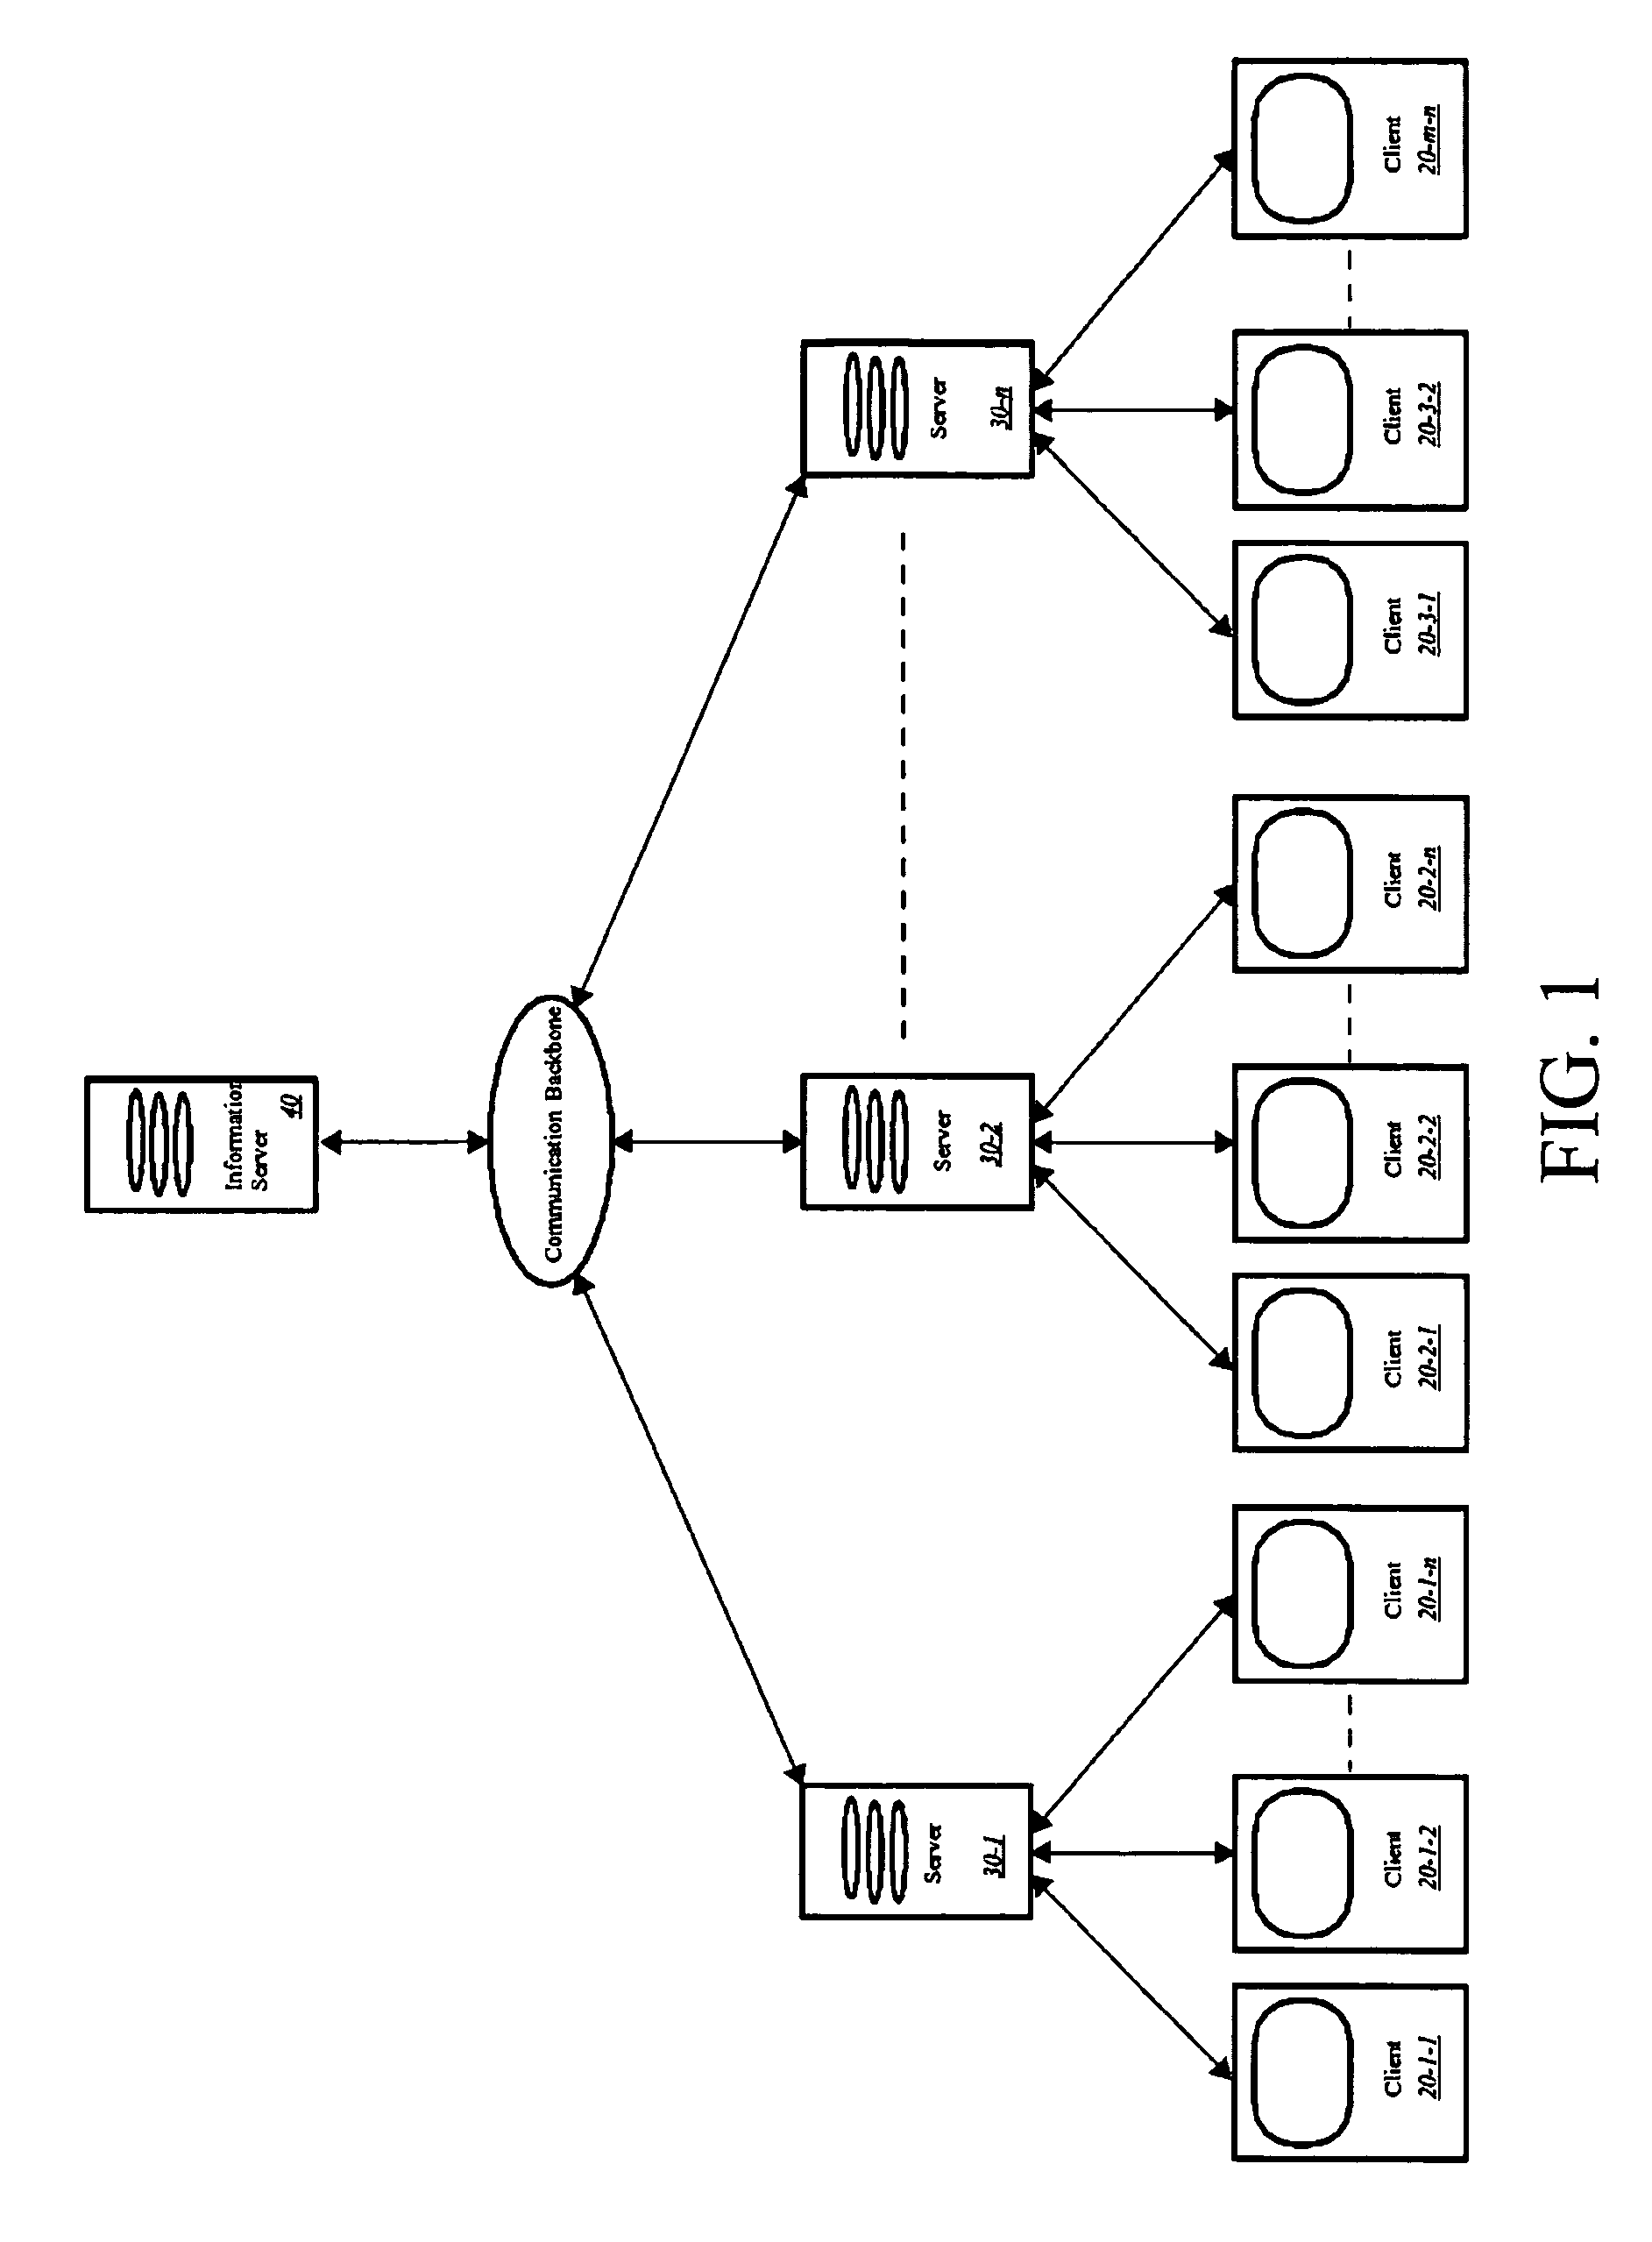 Method for horizontal integration and research of information of medical records utilizing HIPPA compliant internet protocols, workflow management and static/dynamic processing of information